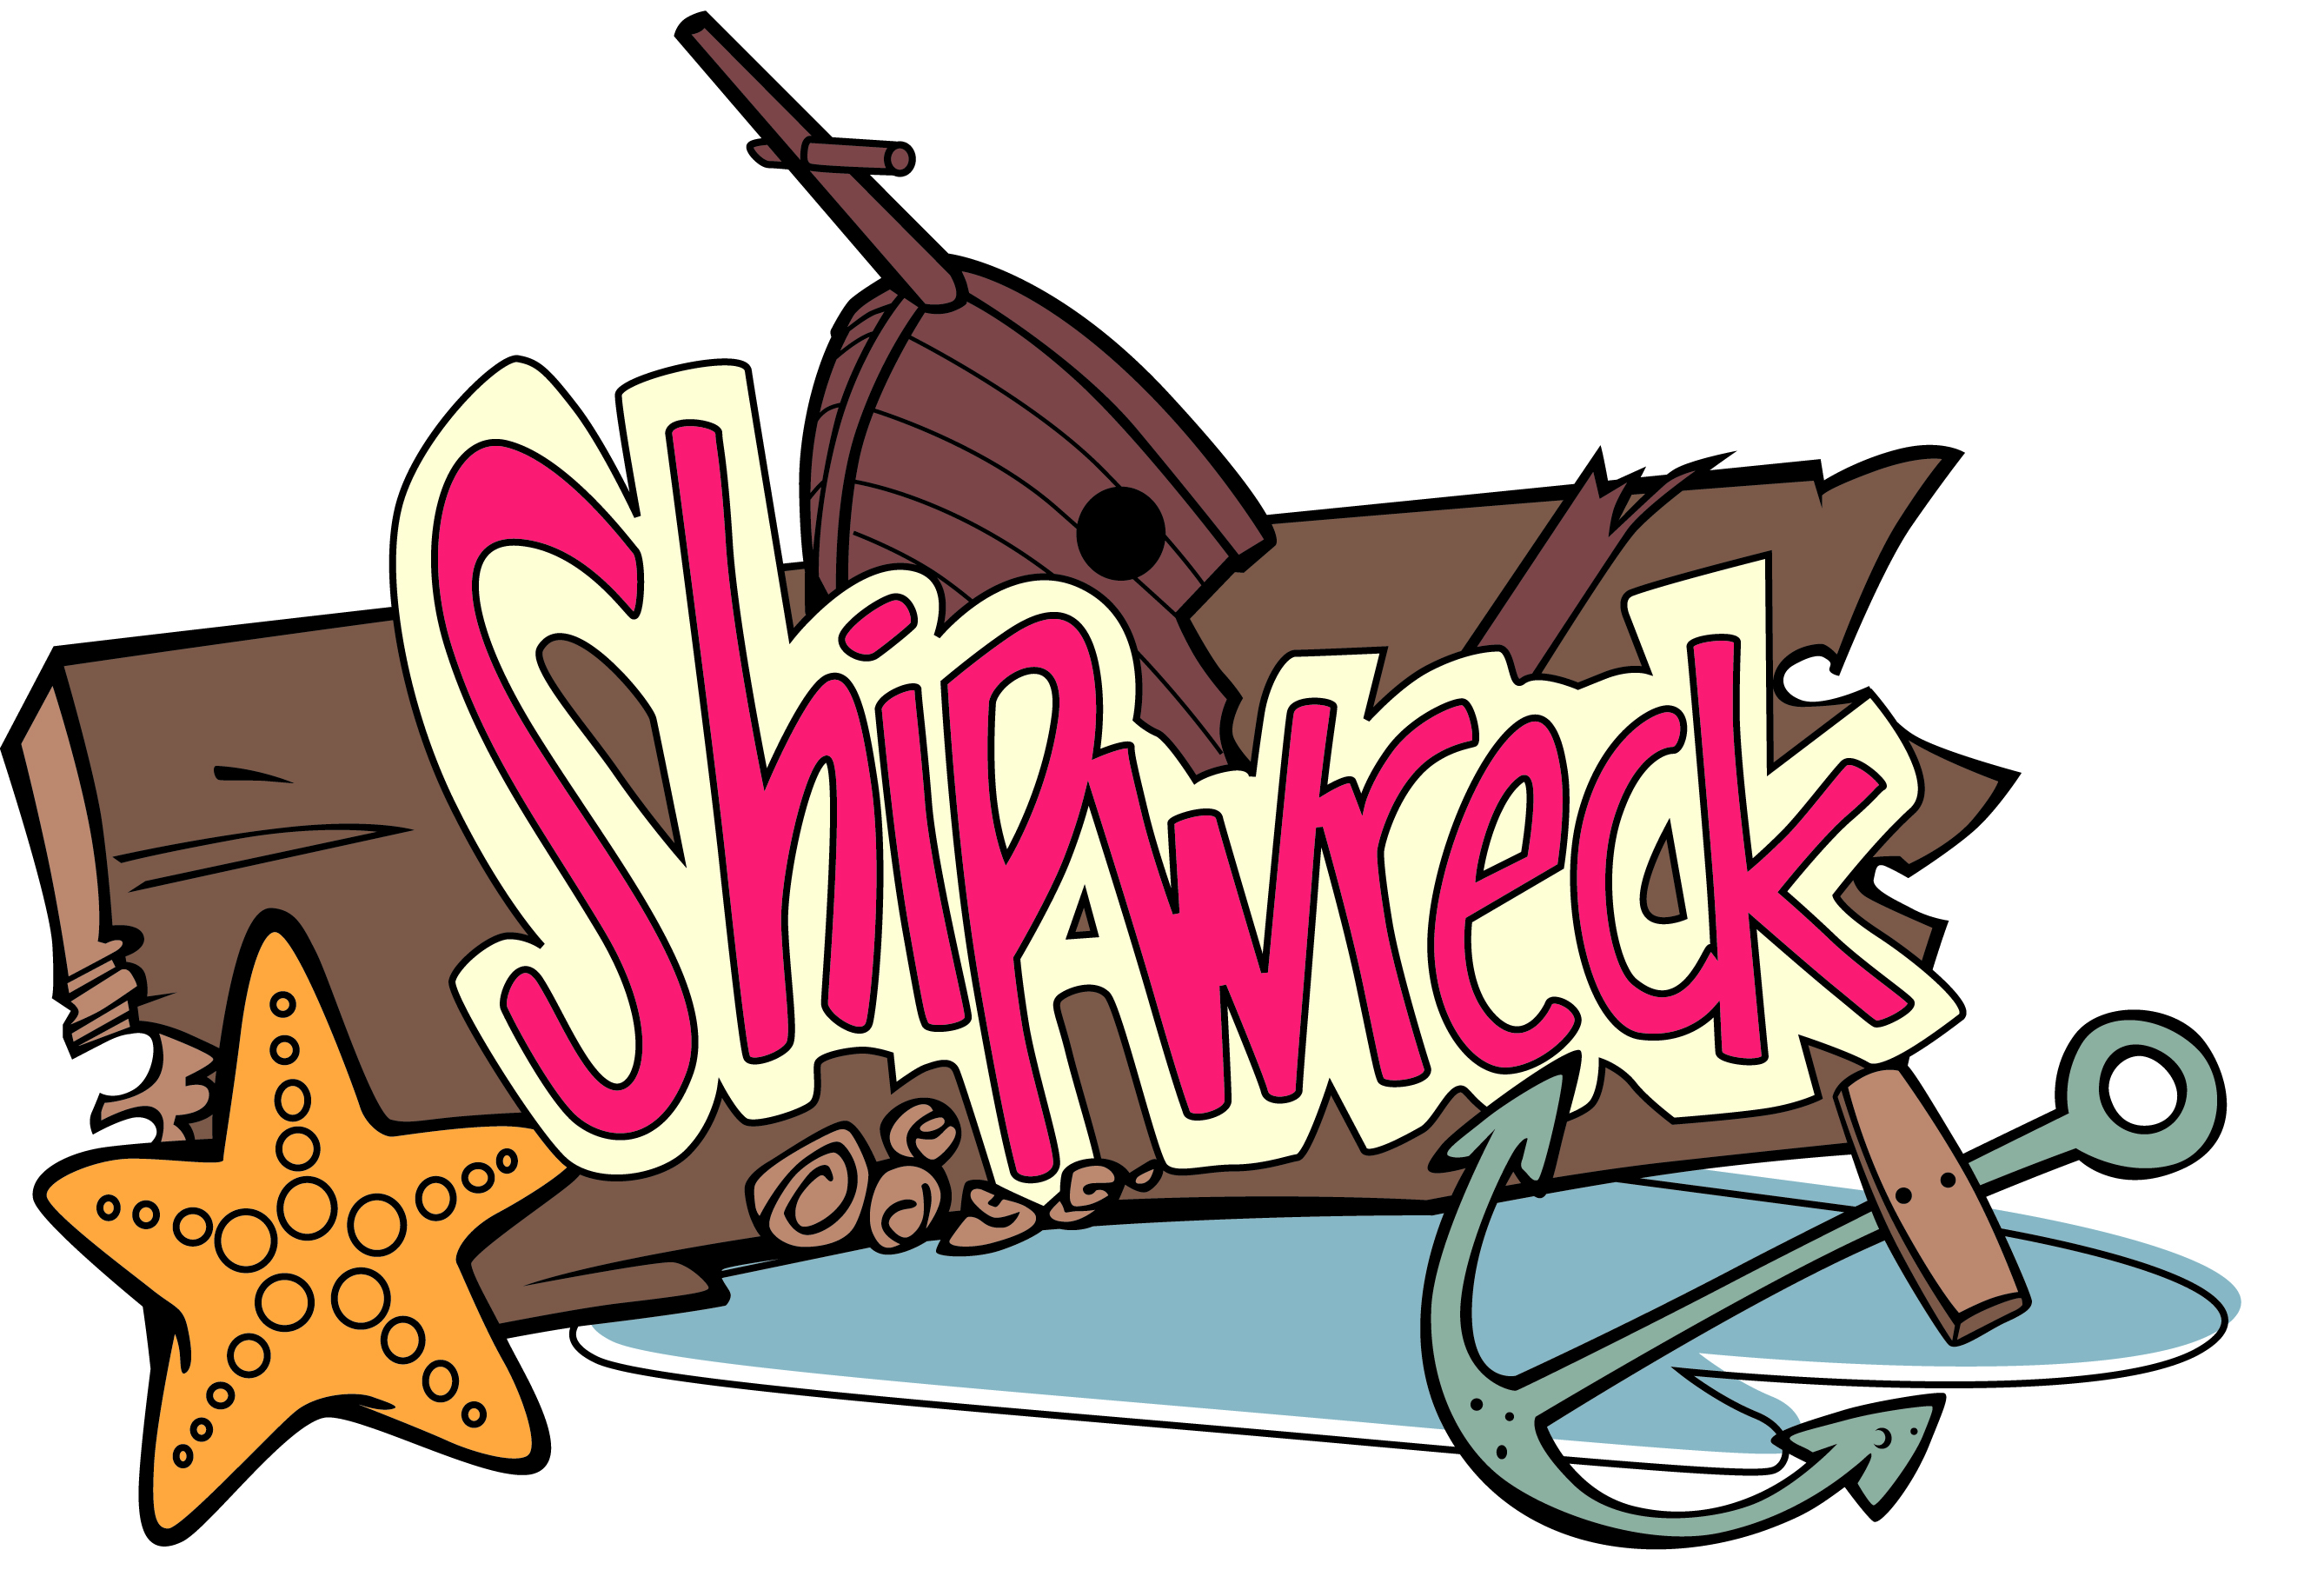 Shipwreck clipart #1, Download drawings